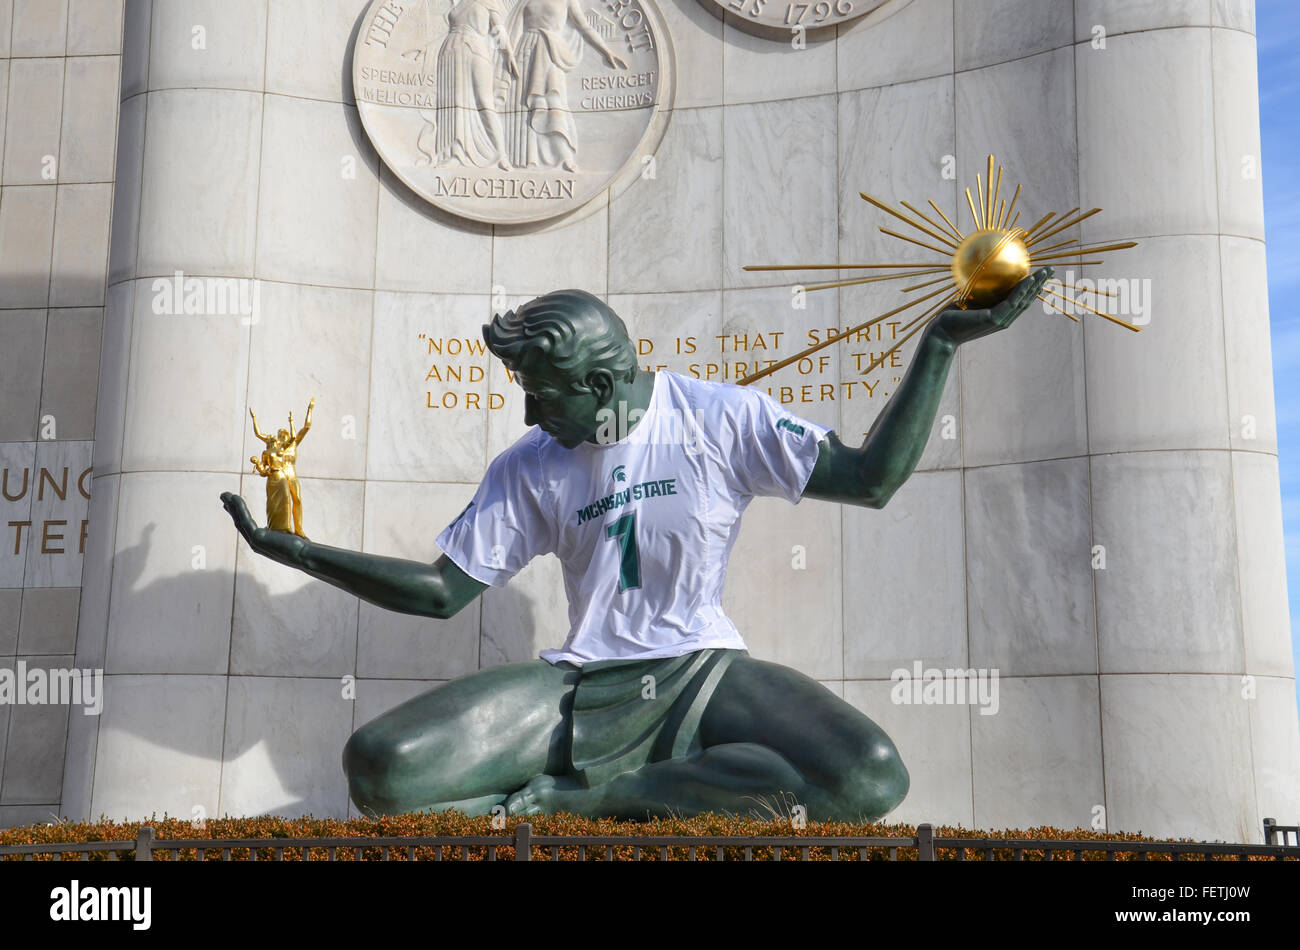 DETROIT, MI - DECEMBER 24: The Spirit of Detroit monument in Detroit, MI, is covered in a Michigan State University shirt on Dec Stock Photo